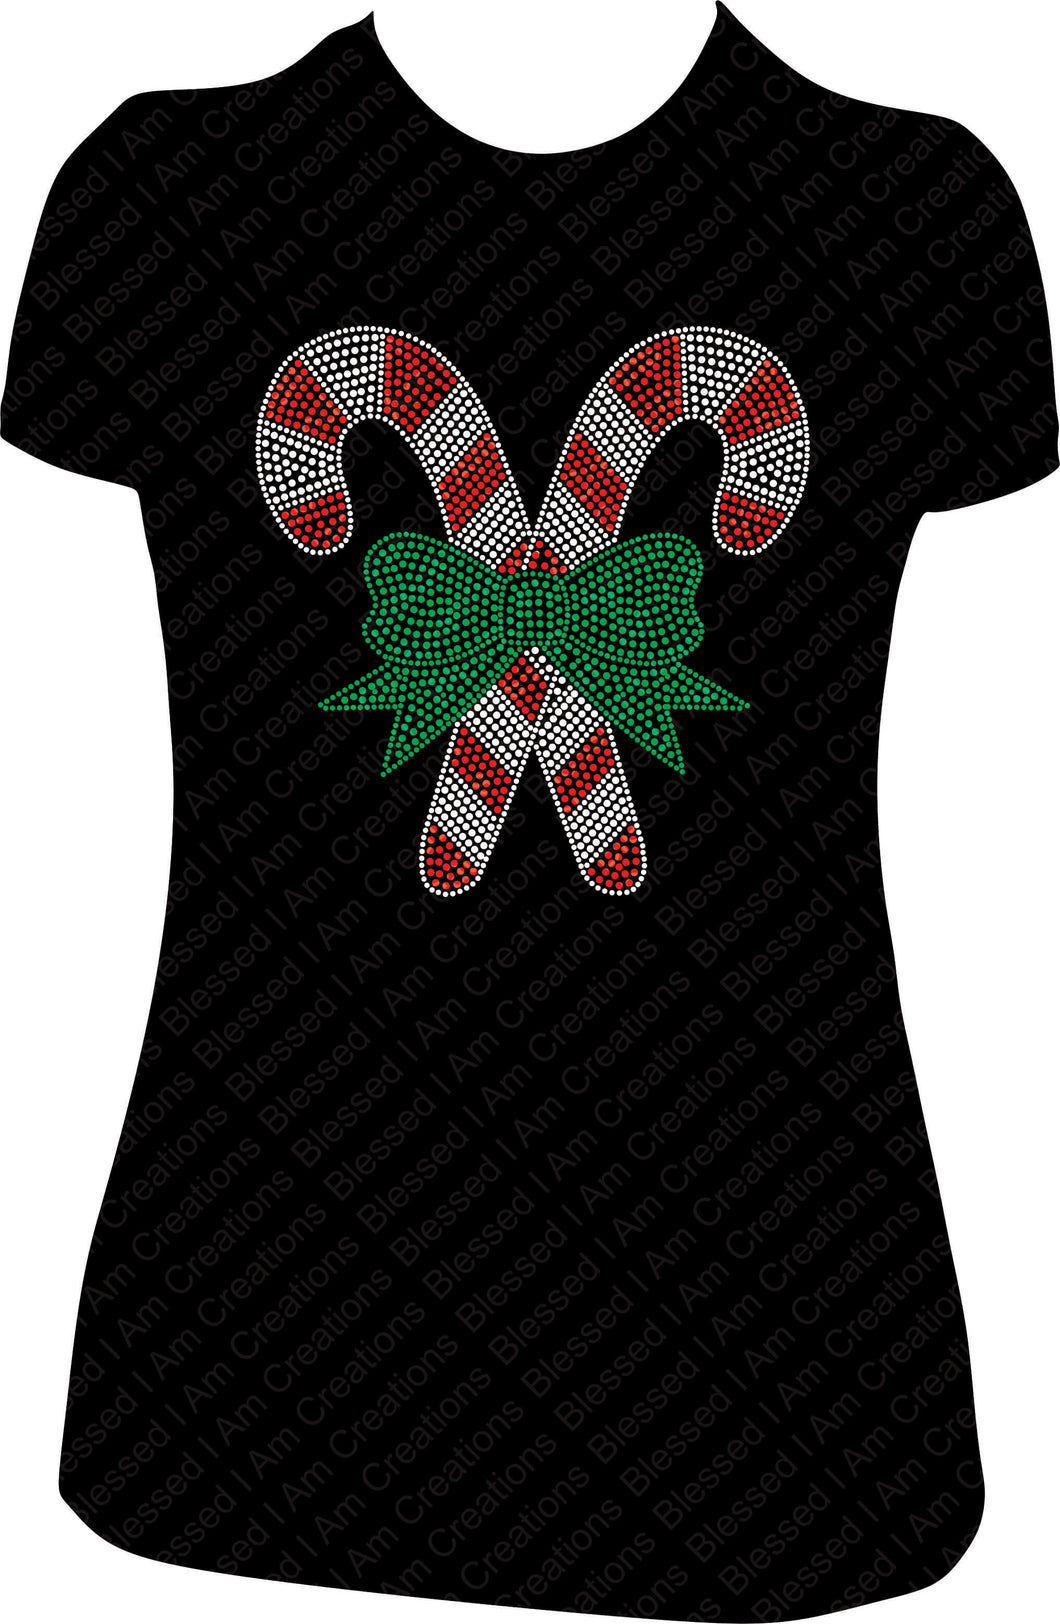 Candy Can Shirt, Christmas Candy Cane Bling Shirt, Bling Christmas Shirt, Rhinestone Christmas Shirt